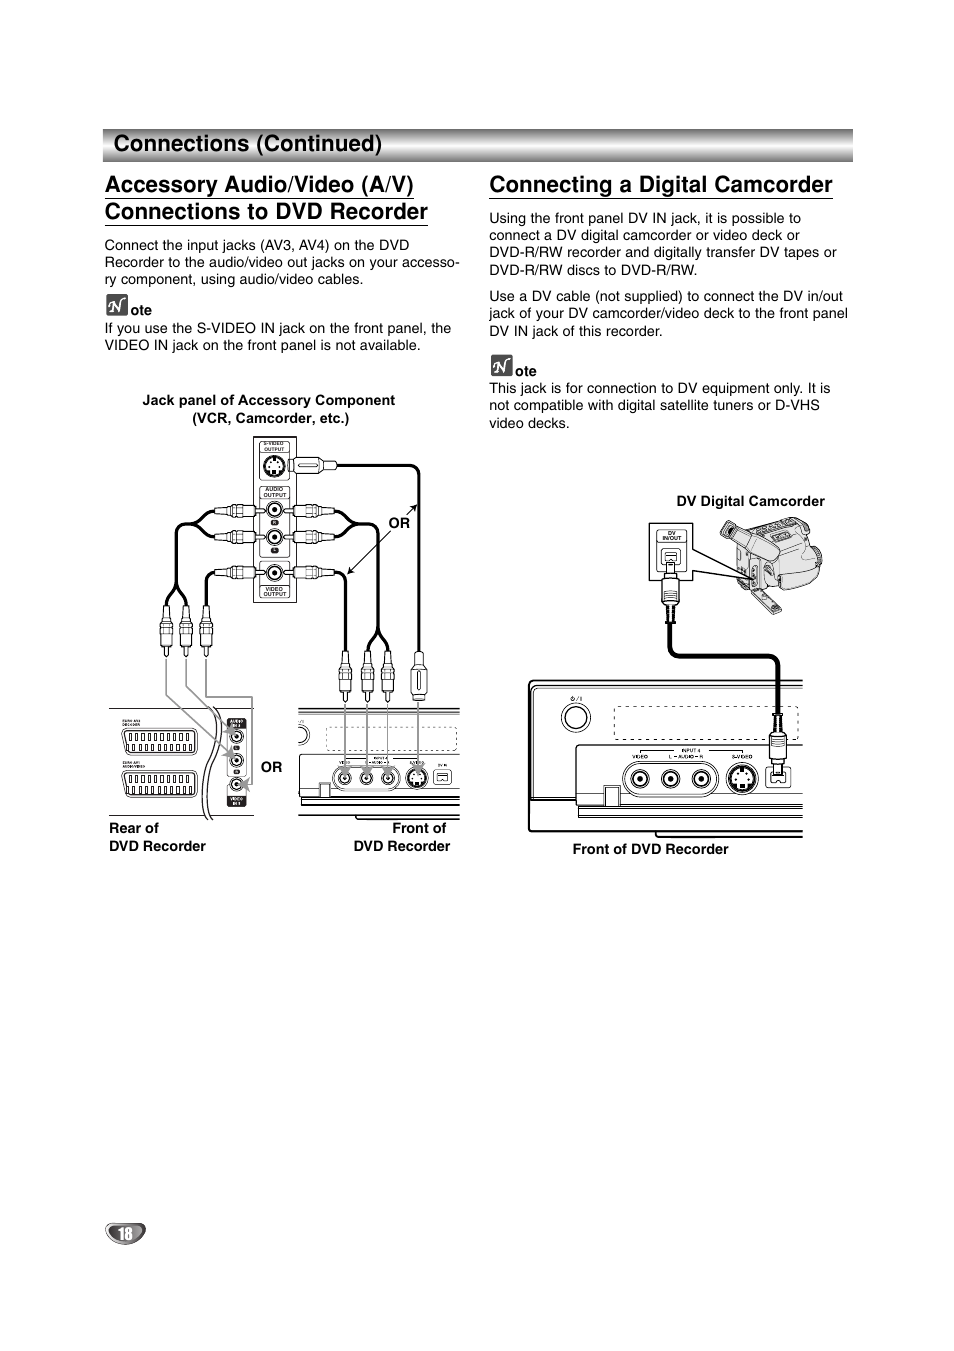 Connections (continued), Connecting a digital camcorder | LG DR4912 User Manual | Page 18 / 64